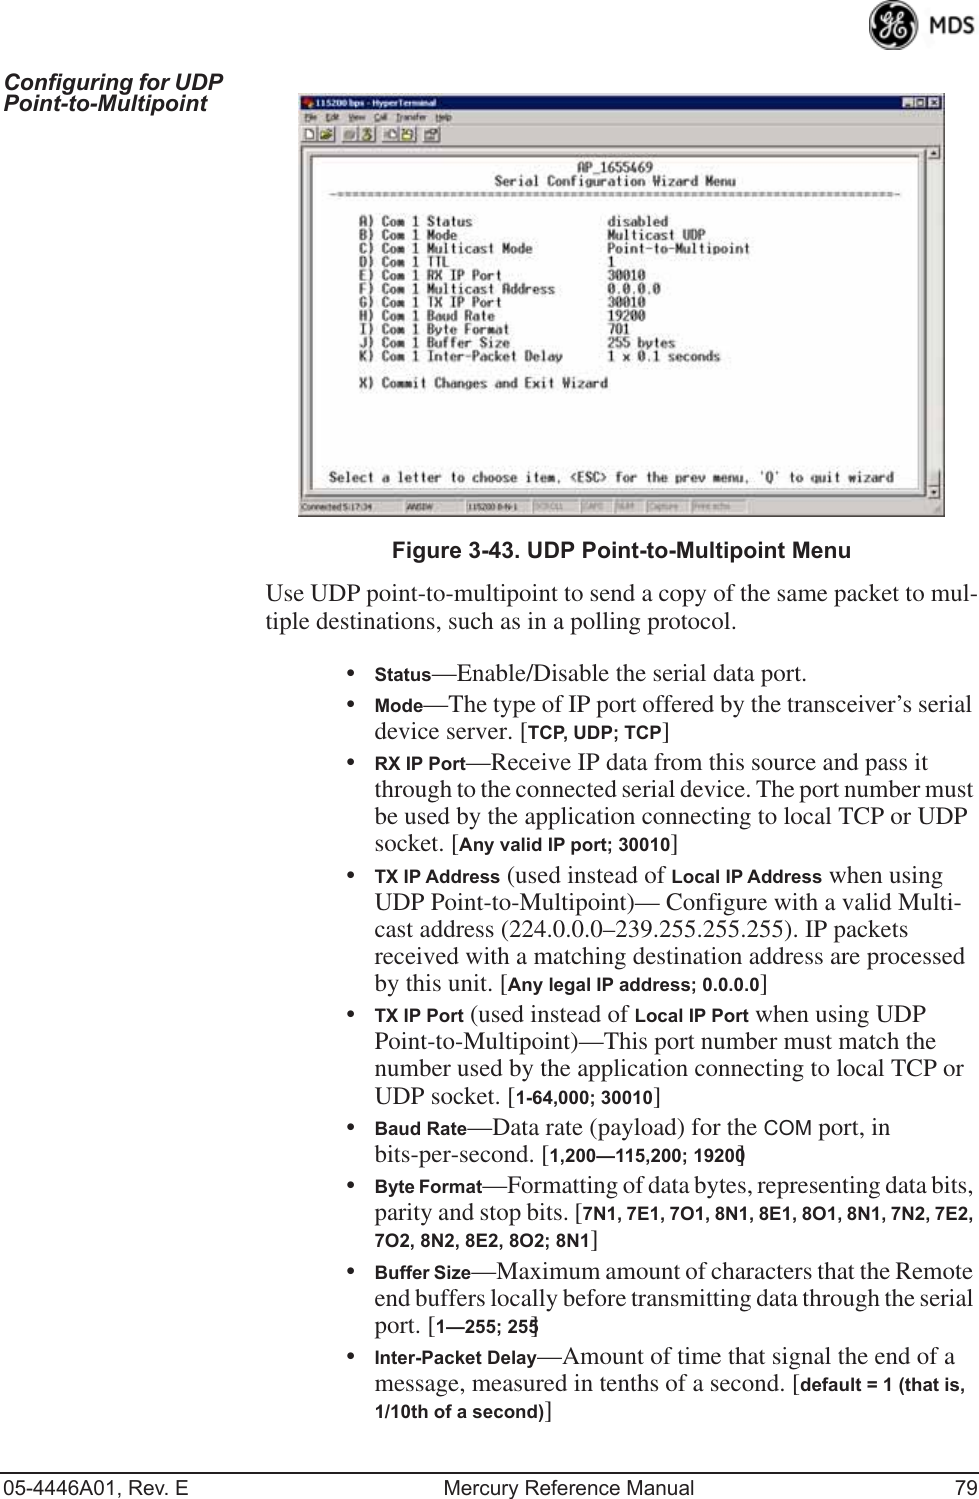 05-4446A01, Rev. E Mercury Reference Manual 79Configuring for UDP Point-to-Multipoint Invisible place holderFigure 3-43. UDP Point-to-Multipoint MenuUse UDP point-to-multipoint to send a copy of the same packet to mul-tiple destinations, such as in a polling protocol.•Status—Enable/Disable the serial data port.•Mode—The type of IP port offered by the transceiver’s serial device server. [TCP, UDP; TCP]•RX IP Port—Receive IP data from this source and pass it through to the connected serial device. The port number must be used by the application connecting to local TCP or UDP socket. [Any valid IP port; 30010]•TX IP Address (used instead of Local IP Address when using UDP Point-to-Multipoint)— Configure with a valid Multi-cast address (224.0.0.0–239.255.255.255). IP packets received with a matching destination address are processed by this unit. [Any legal IP address; 0.0.0.0]•TX IP Port (used instead of Local IP Port when using UDP Point-to-Multipoint)—This port number must match the number used by the application connecting to local TCP or UDP socket. [1-64,000; 30010]•Baud Rate—Data rate (payload) for the COM port, in bits-per-second. [1,200—115,200; 19200] •Byte Format—Formatting of data bytes, representing data bits, parity and stop bits. [7N1, 7E1, 7O1, 8N1, 8E1, 8O1, 8N1, 7N2, 7E2, 7O2, 8N2, 8E2, 8O2; 8N1]•Buffer Size—Maximum amount of characters that the Remote end buffers locally before transmitting data through the serial port. [1—255; 255]•Inter-Packet Delay—Amount of time that signal the end of a message, measured in tenths of a second. [default = 1 (that is, 1/10th of a second)]